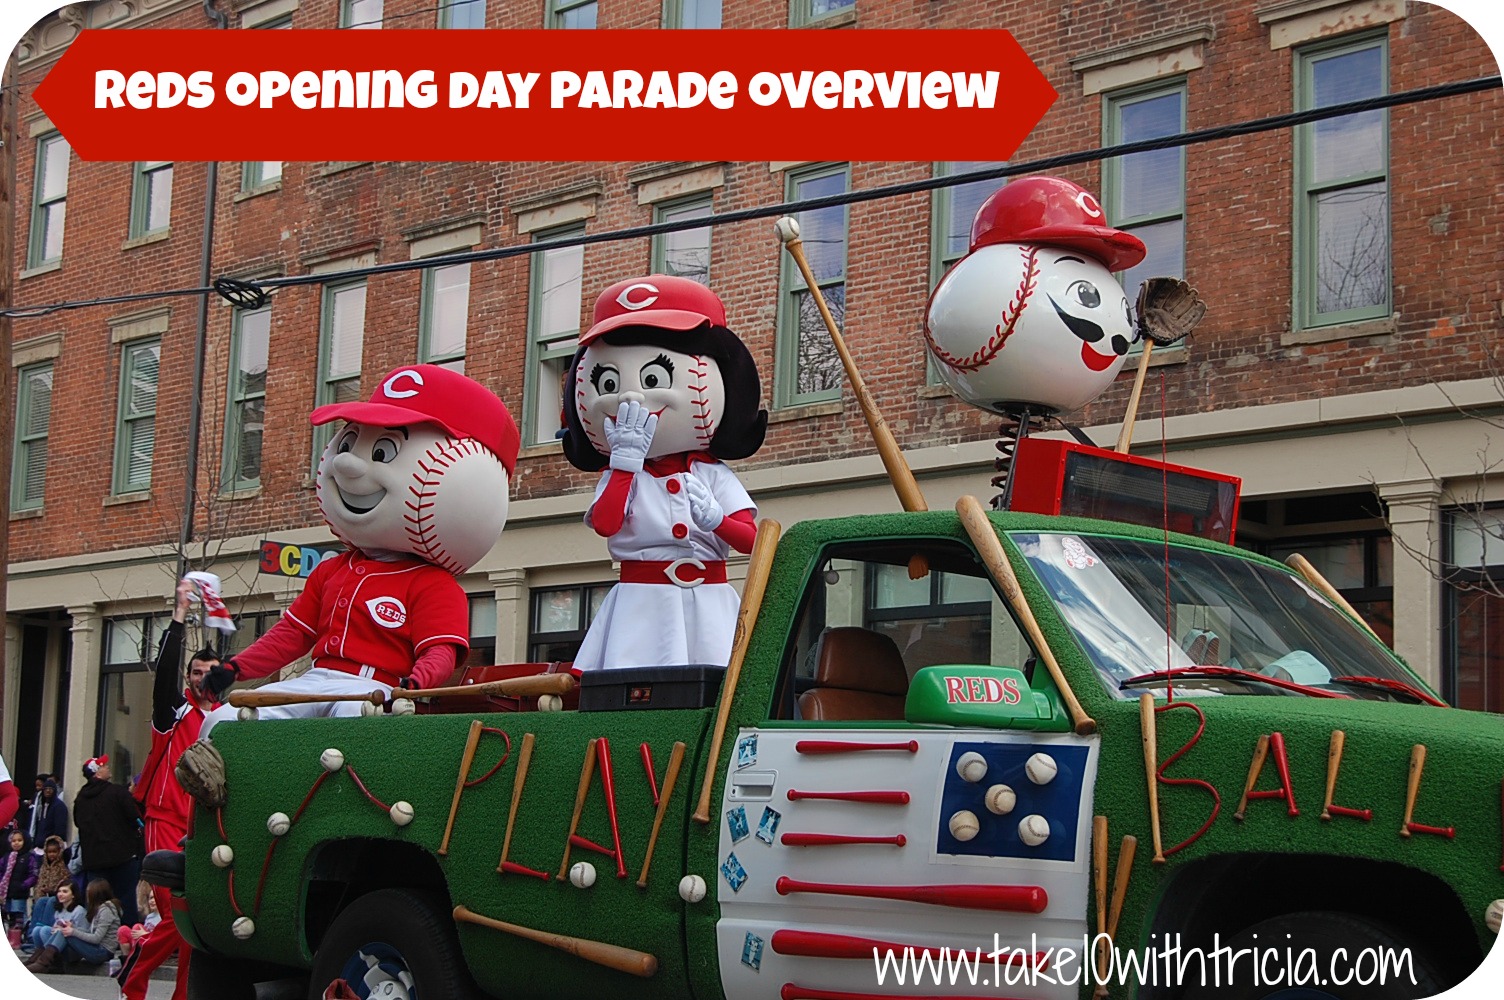 Reds Opening Day Parade Overview | Take 10 With Tricia